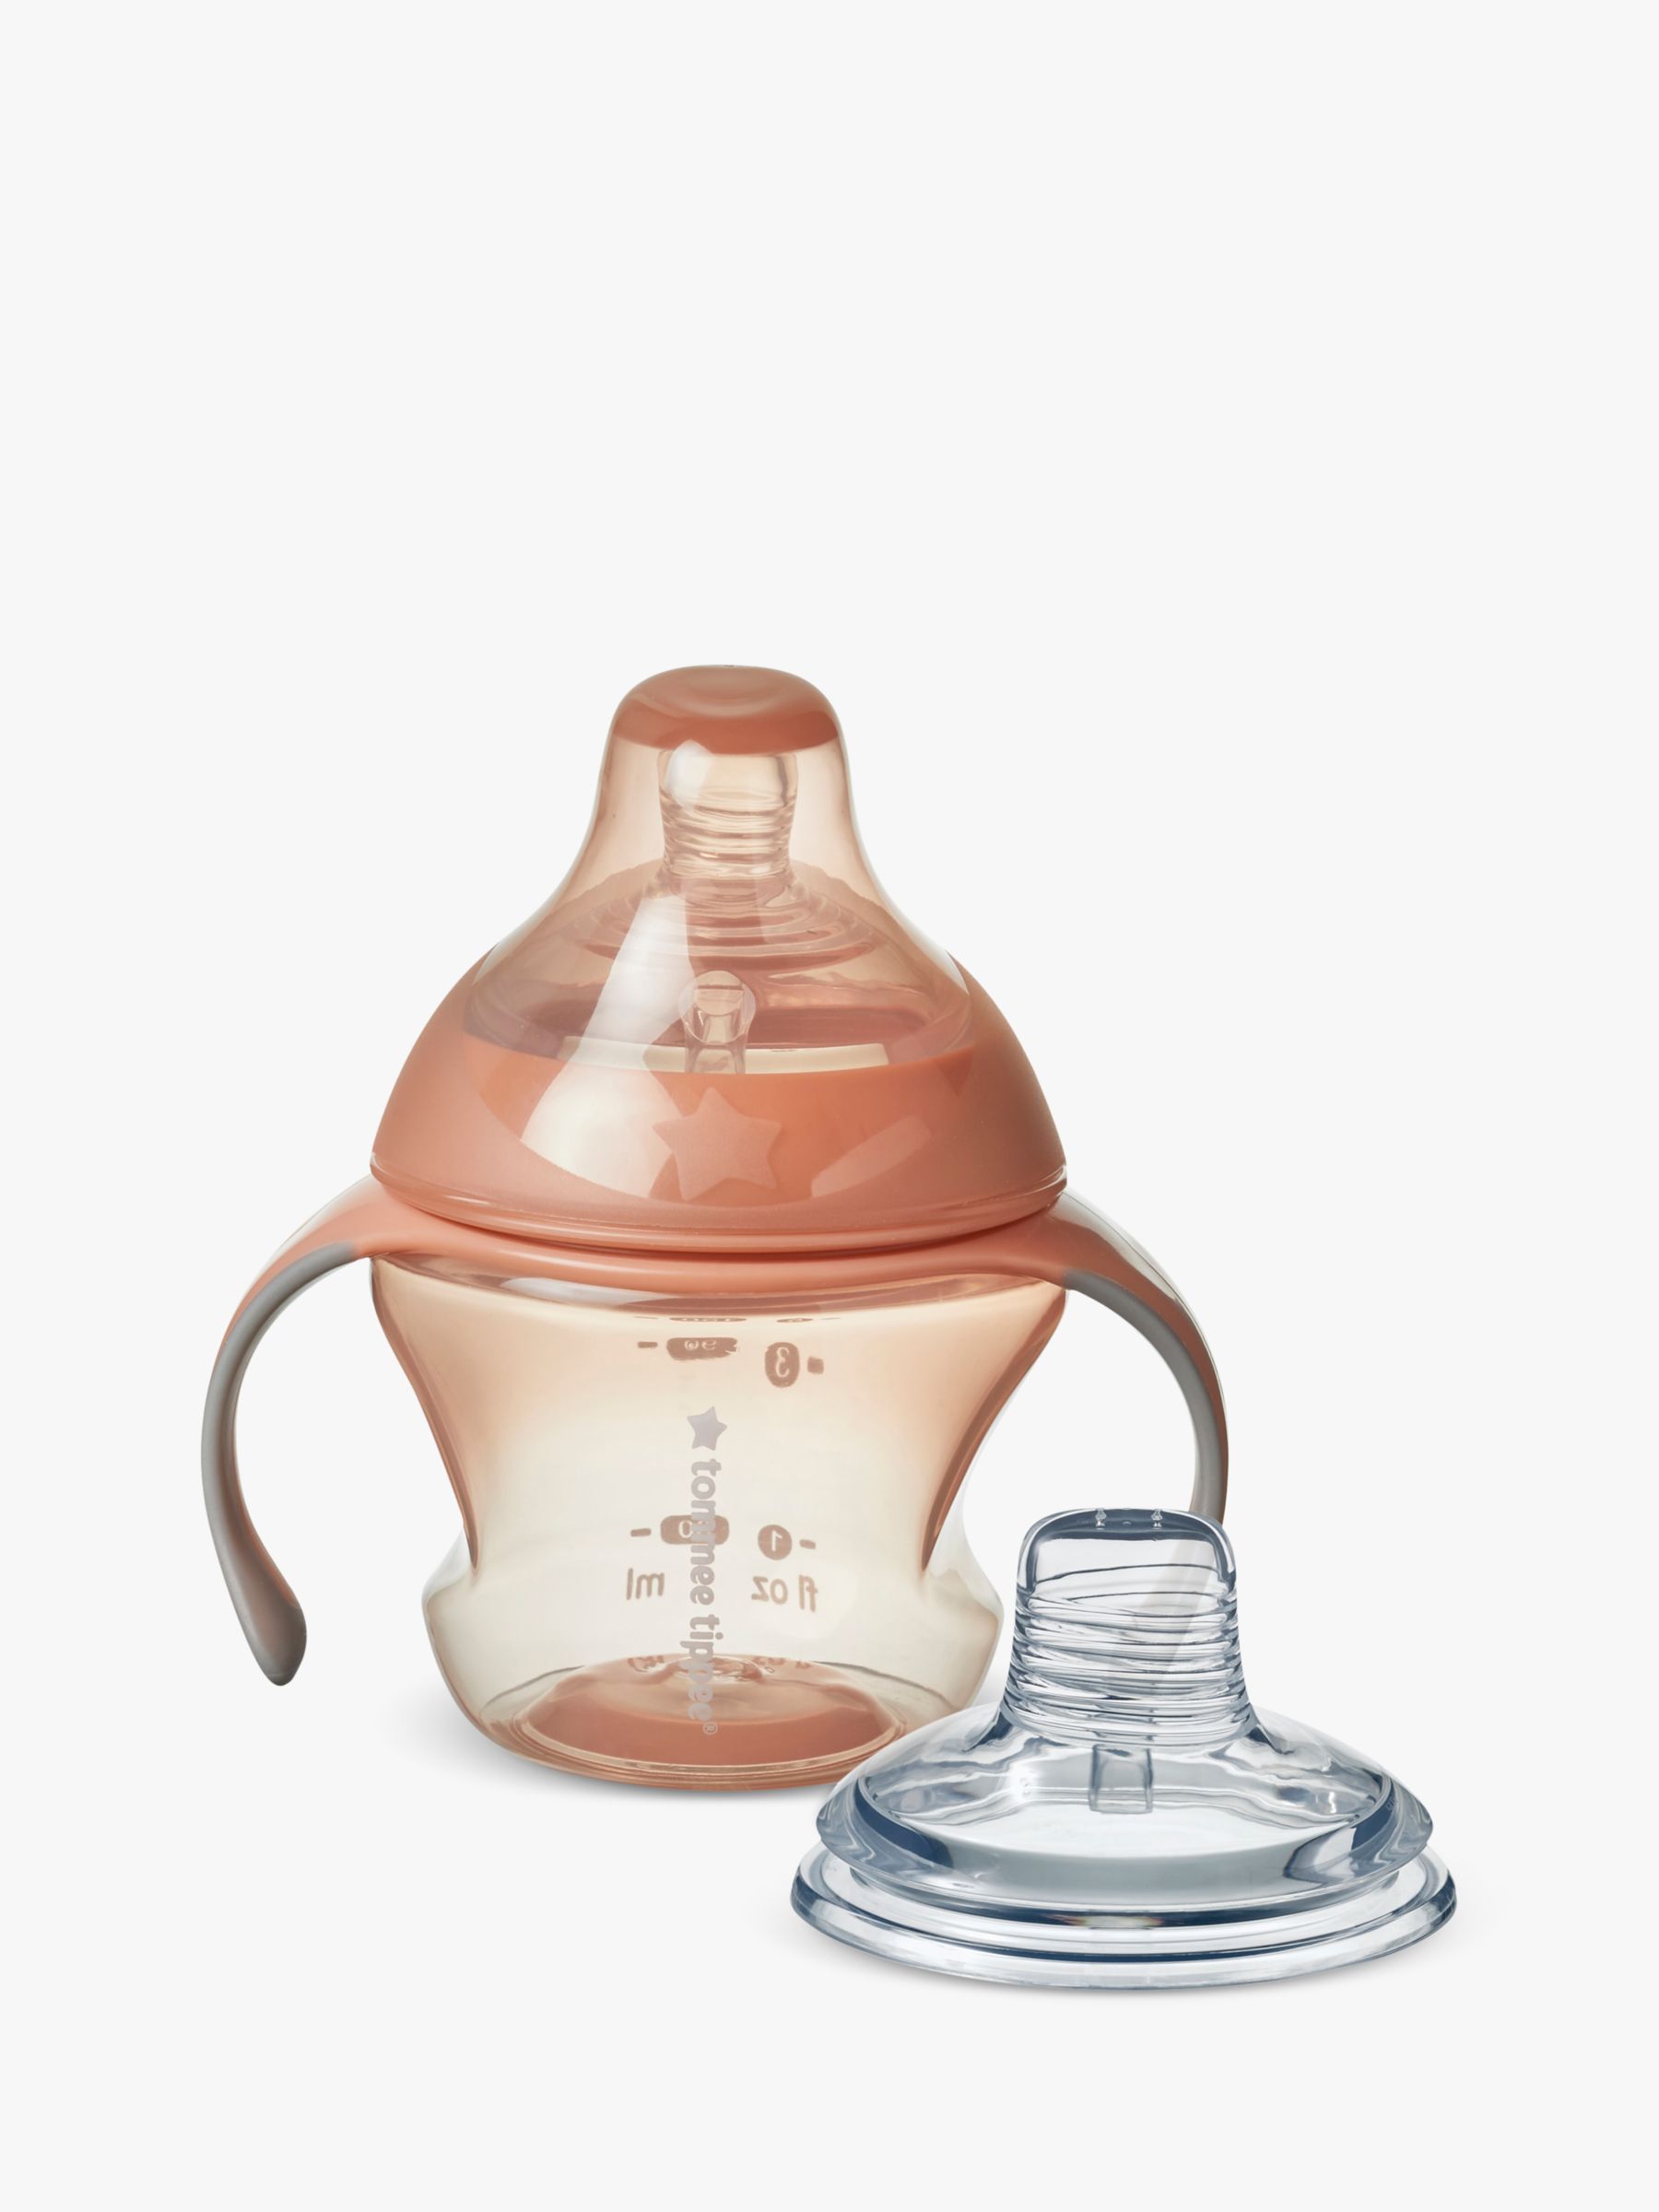 Tommee Tippee sippy cups recalled